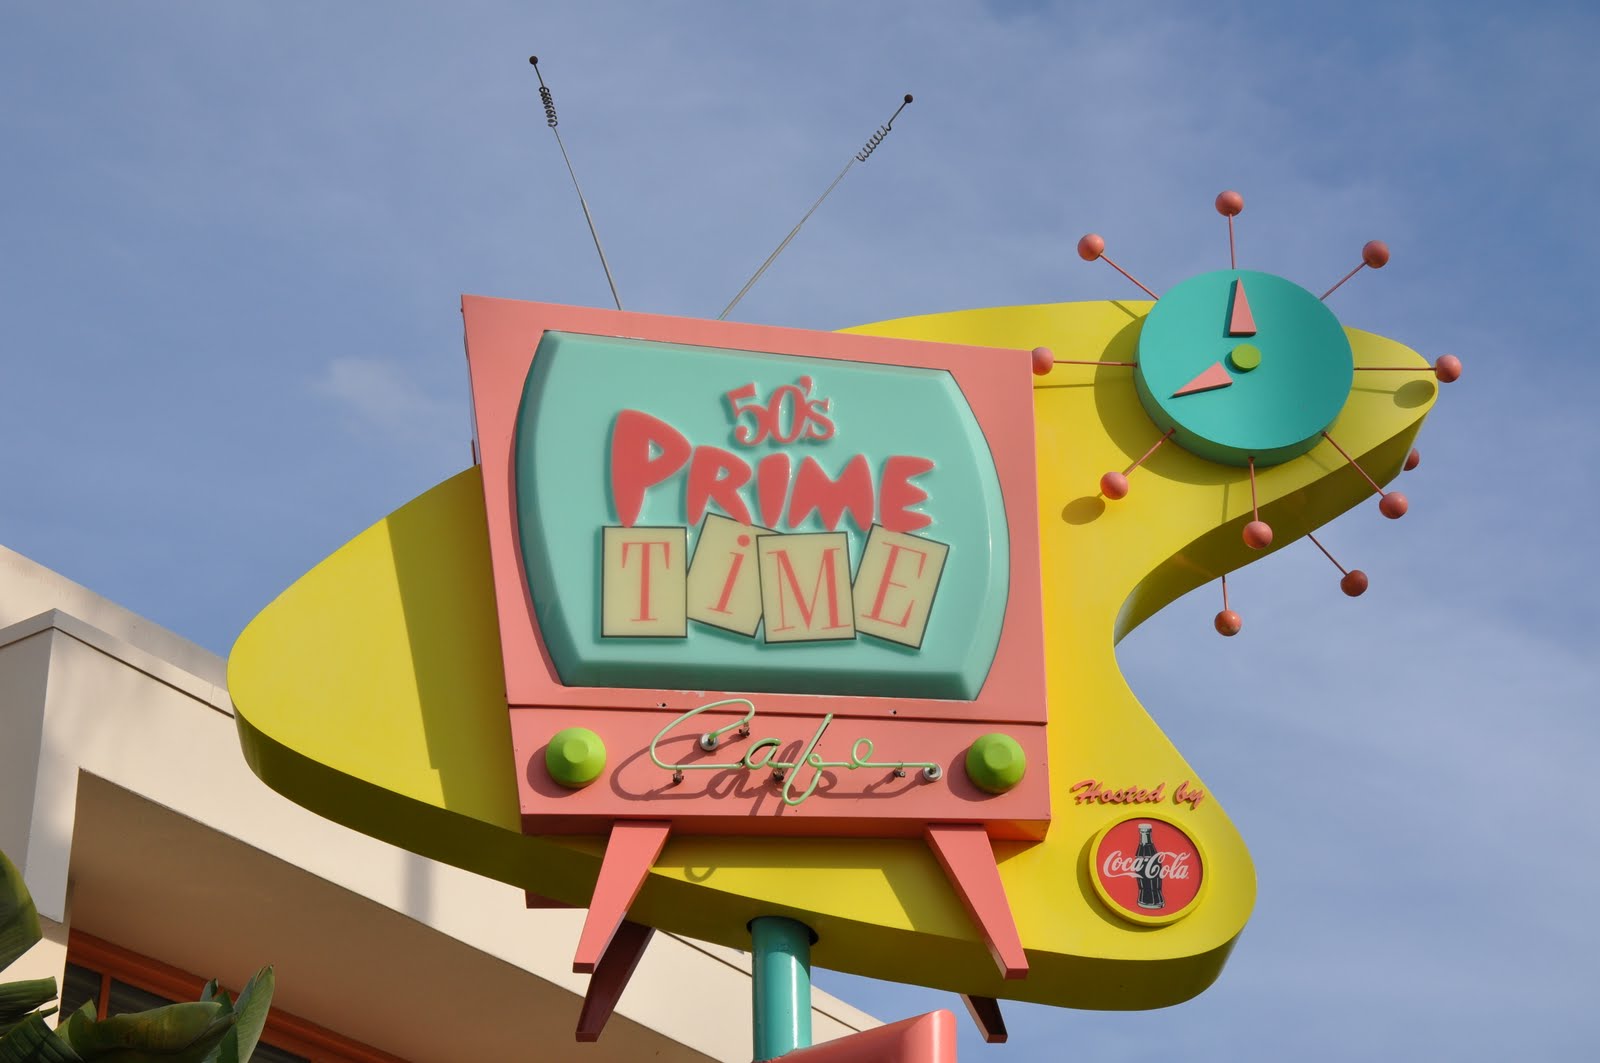 50´s Prime Time Cafe - Hollywood Studios